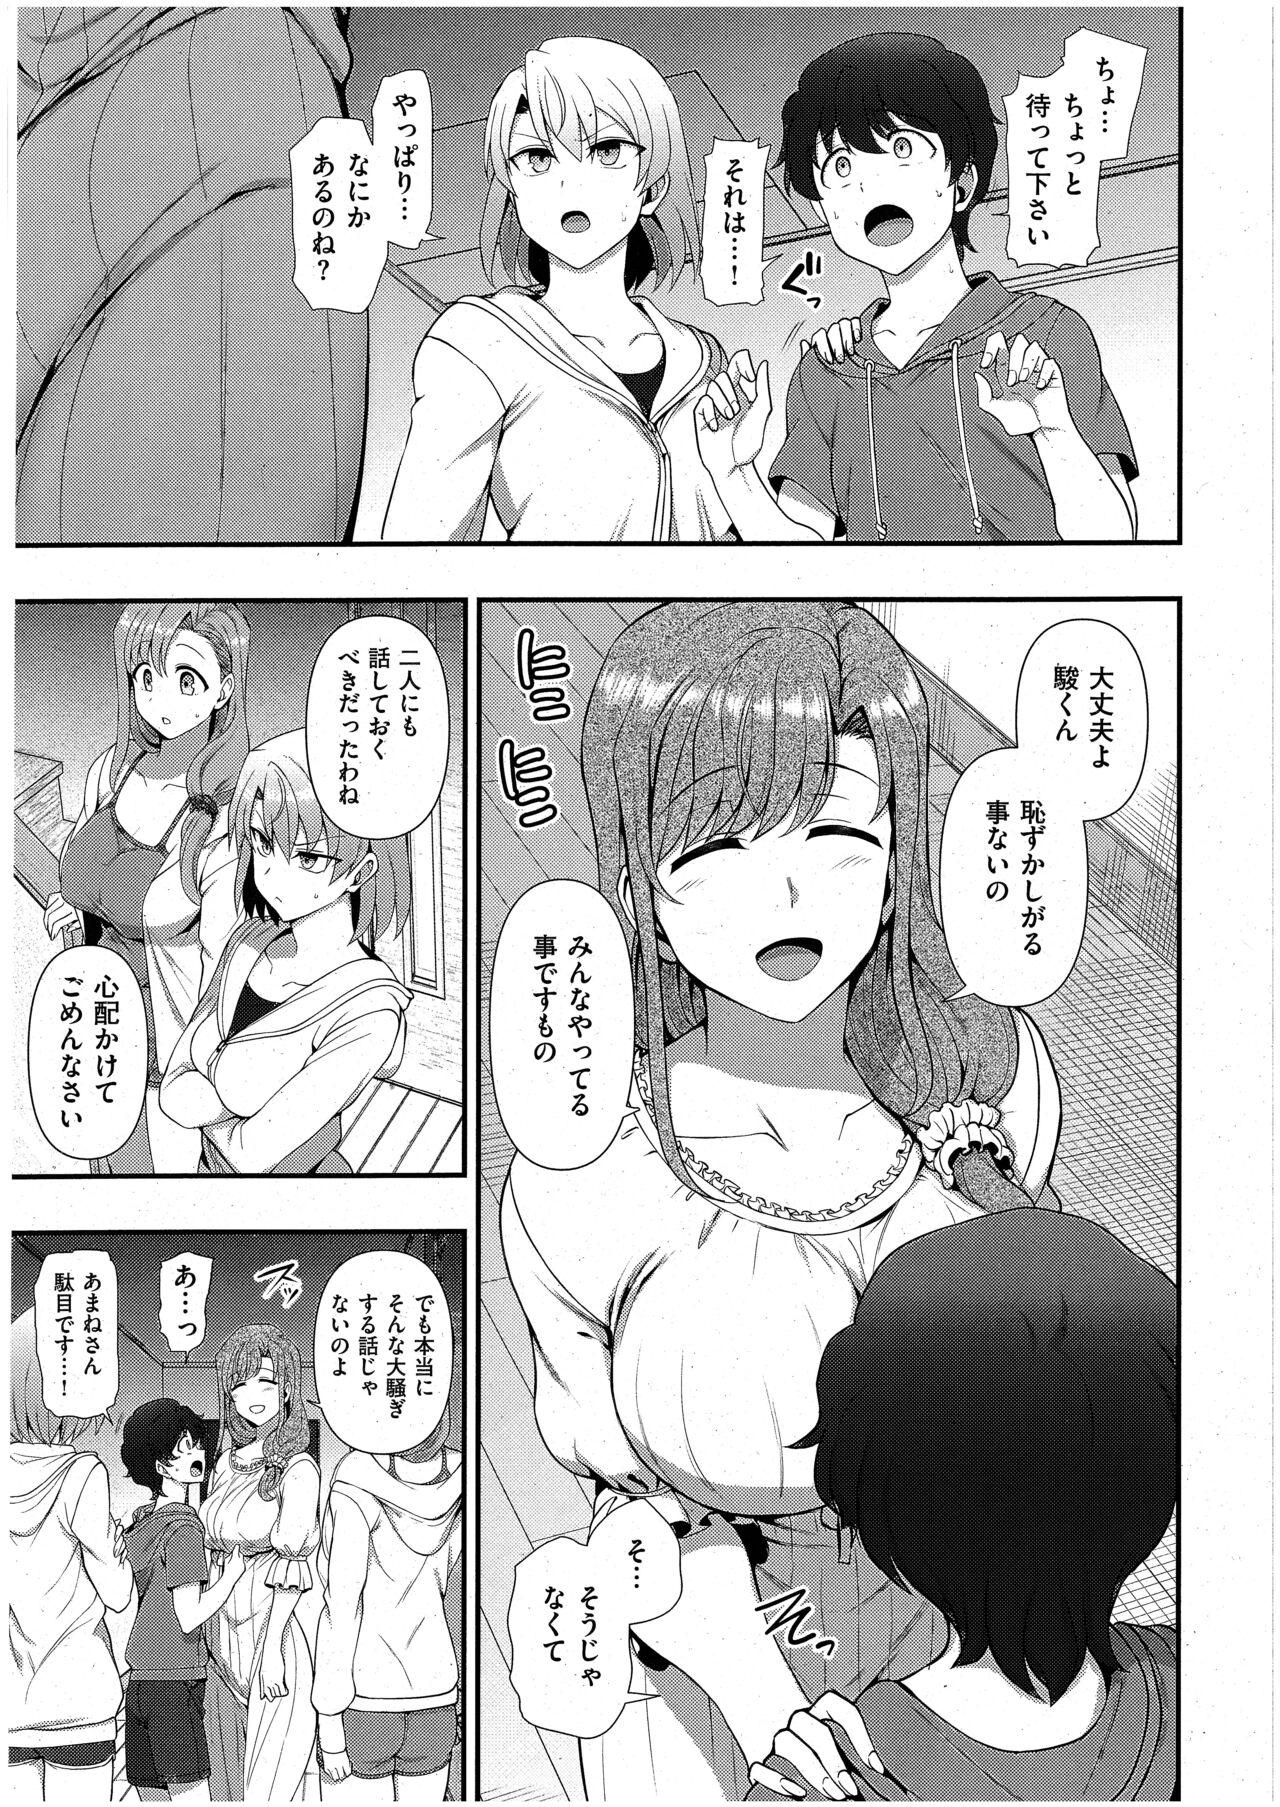 Tgirl FamiCon - Family Control Ch. 3 Stepbrother - Page 5